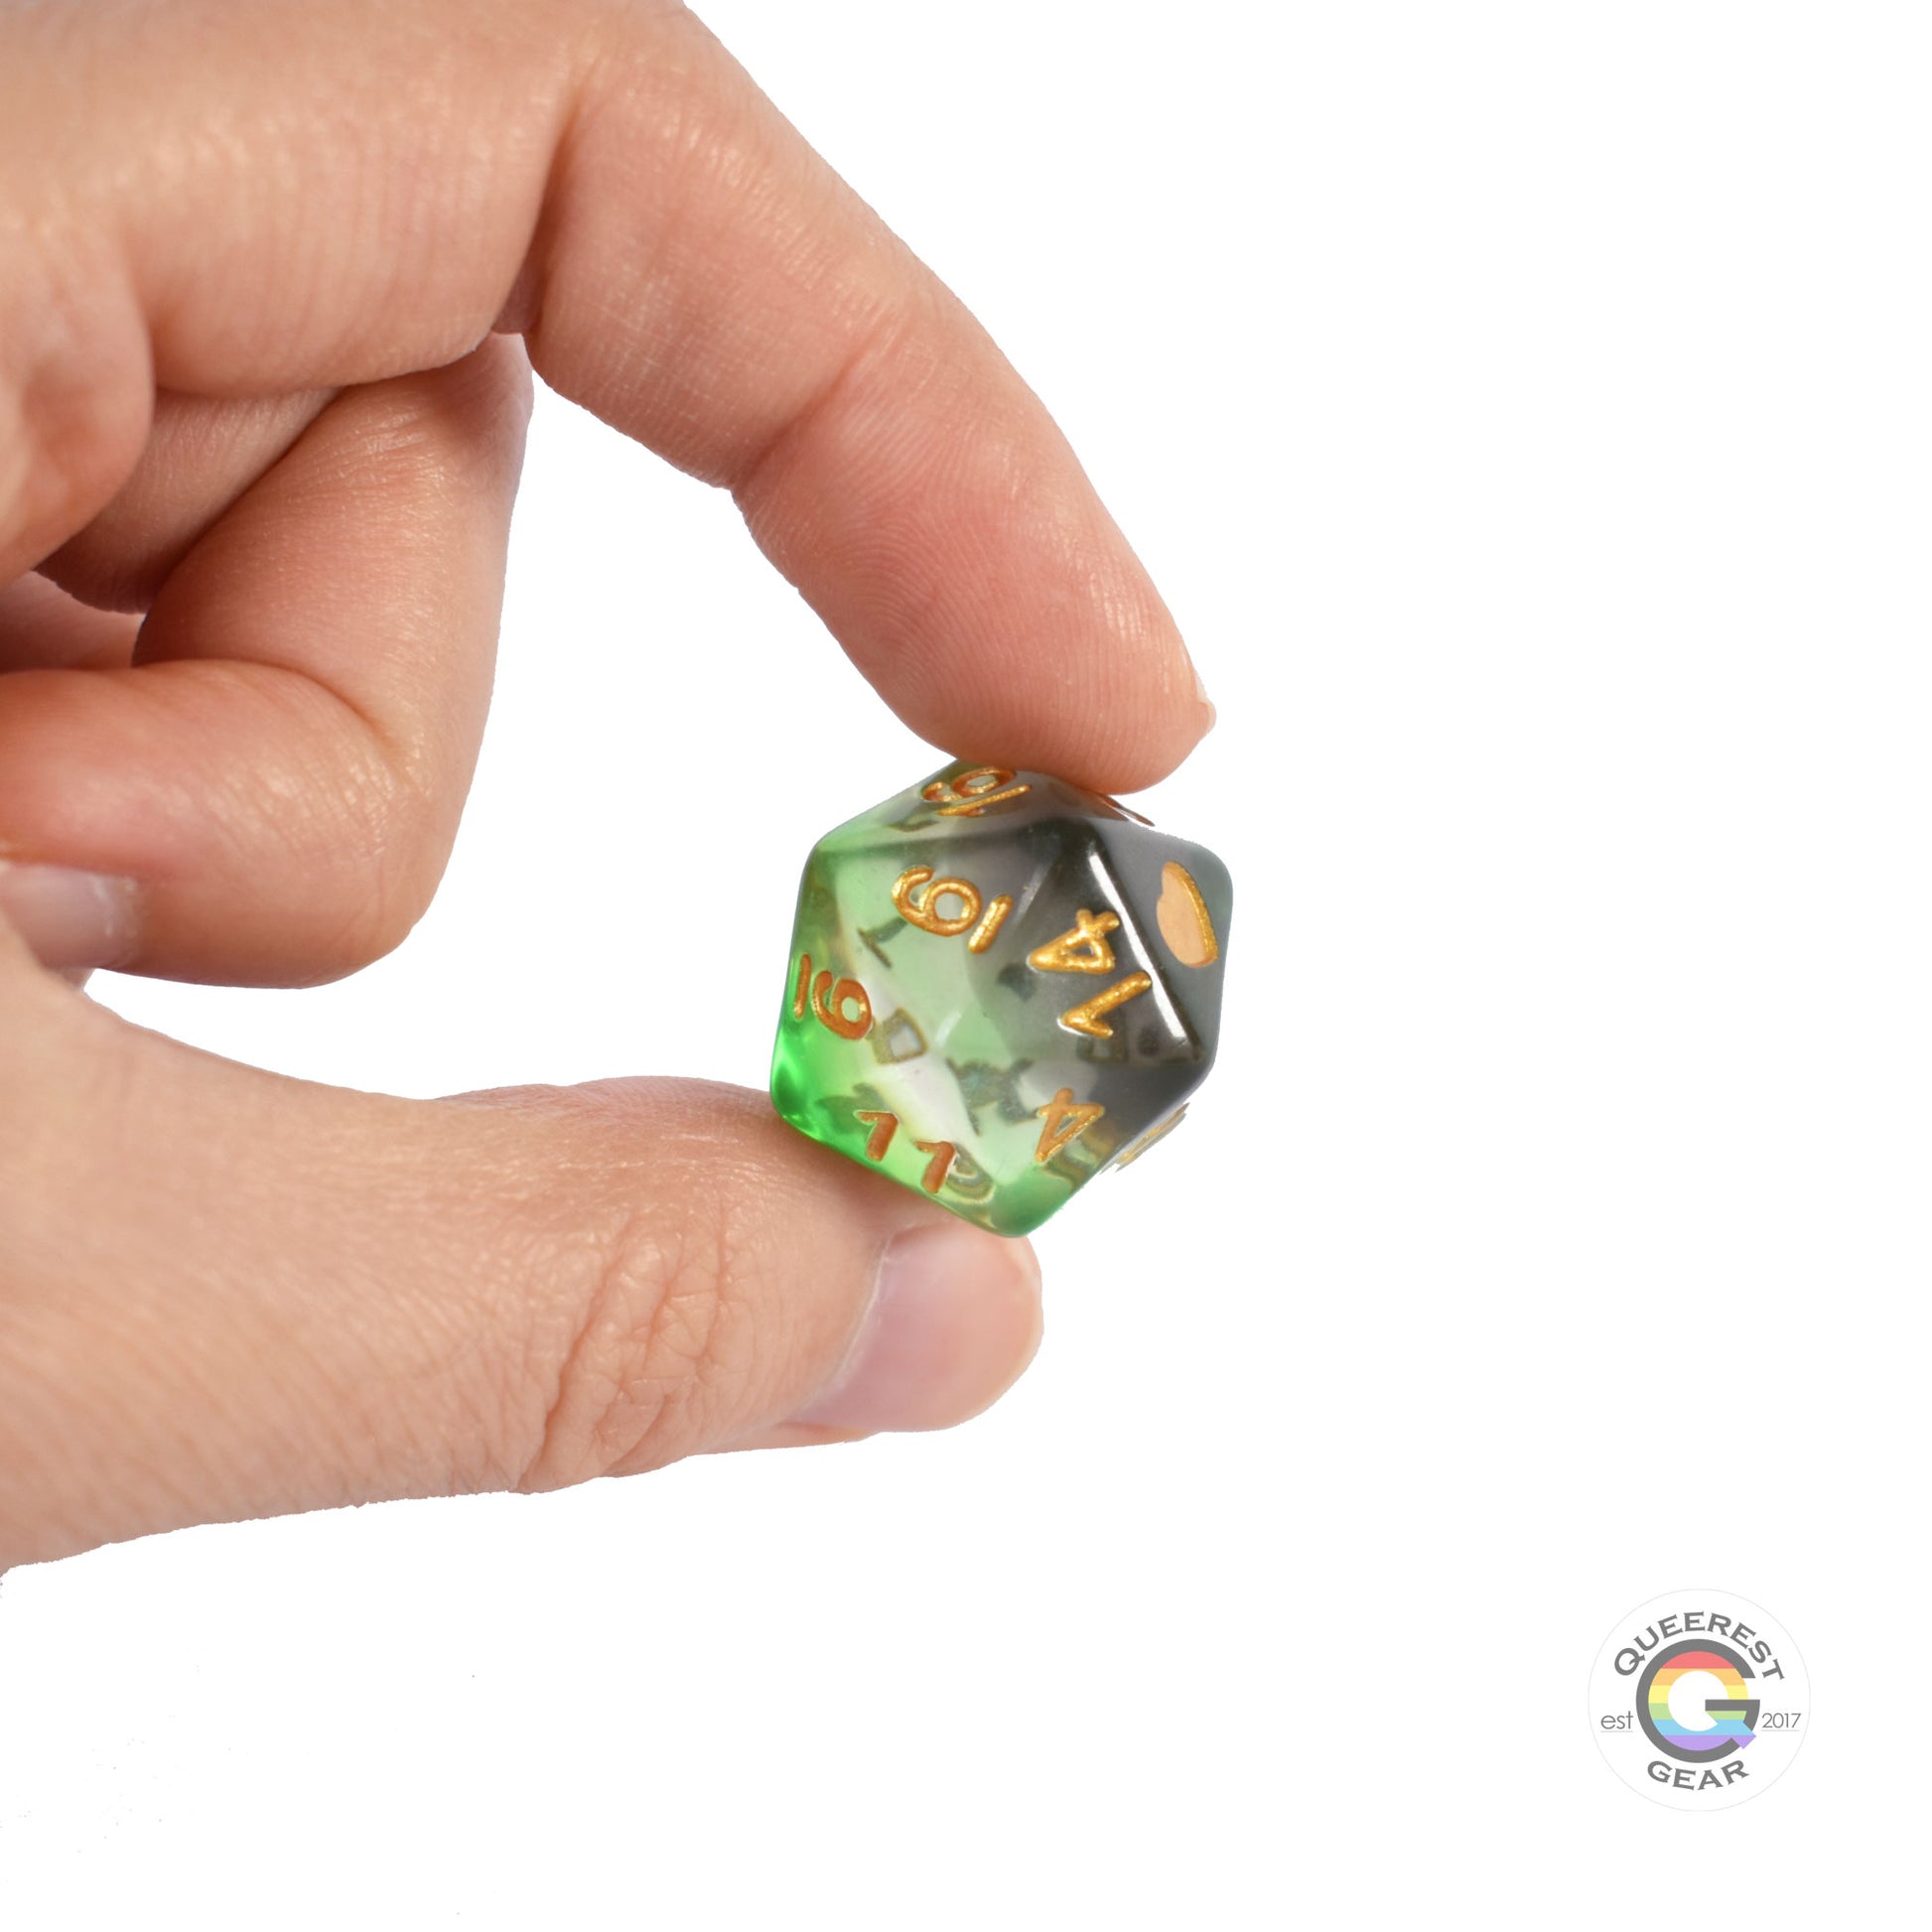 A hand holding up the d20 to show off the color and transparency